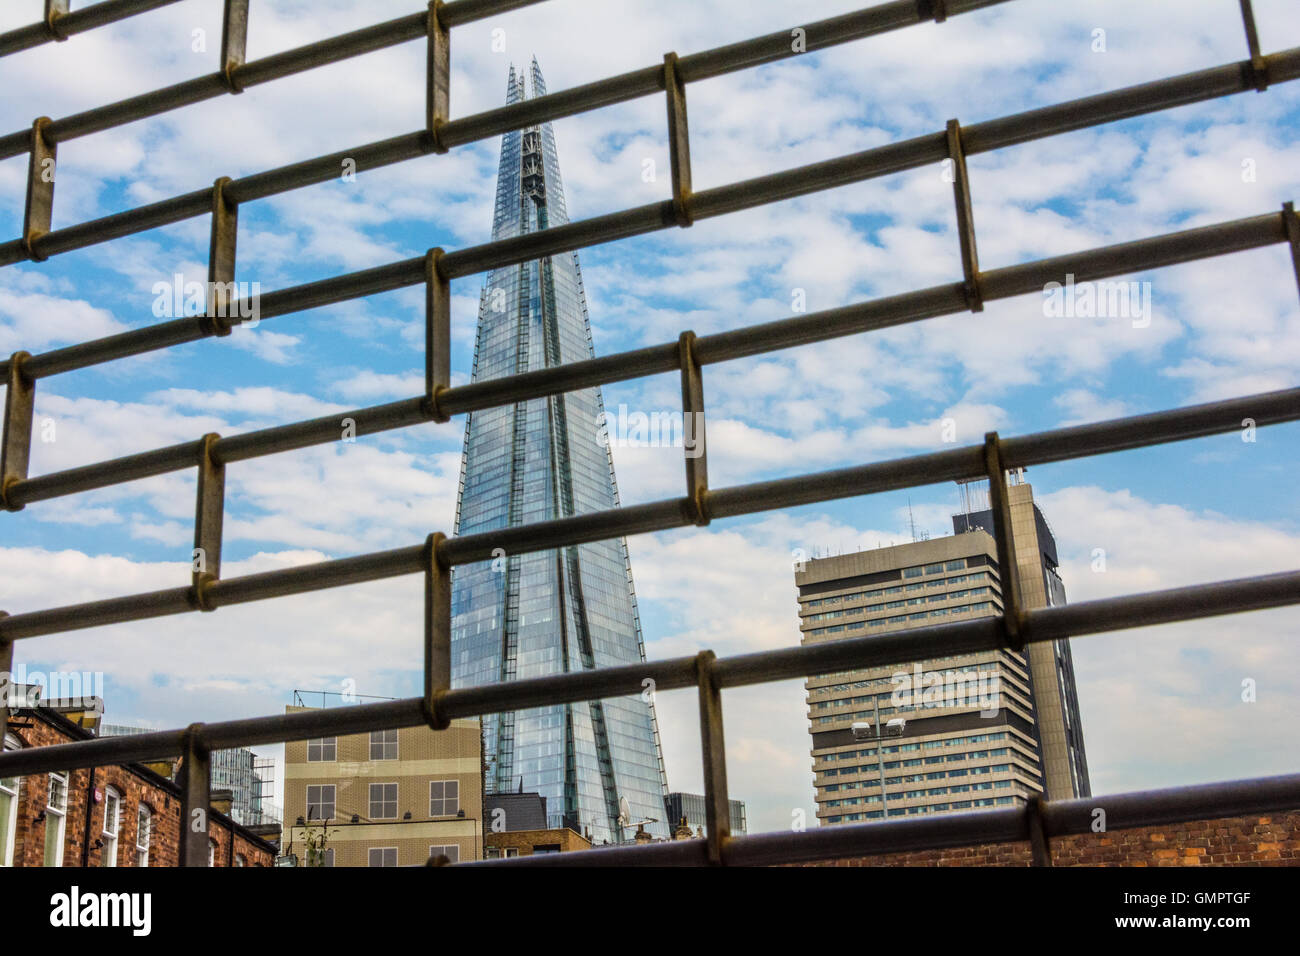 Views of the Shard from SE London, UK Stock Photo